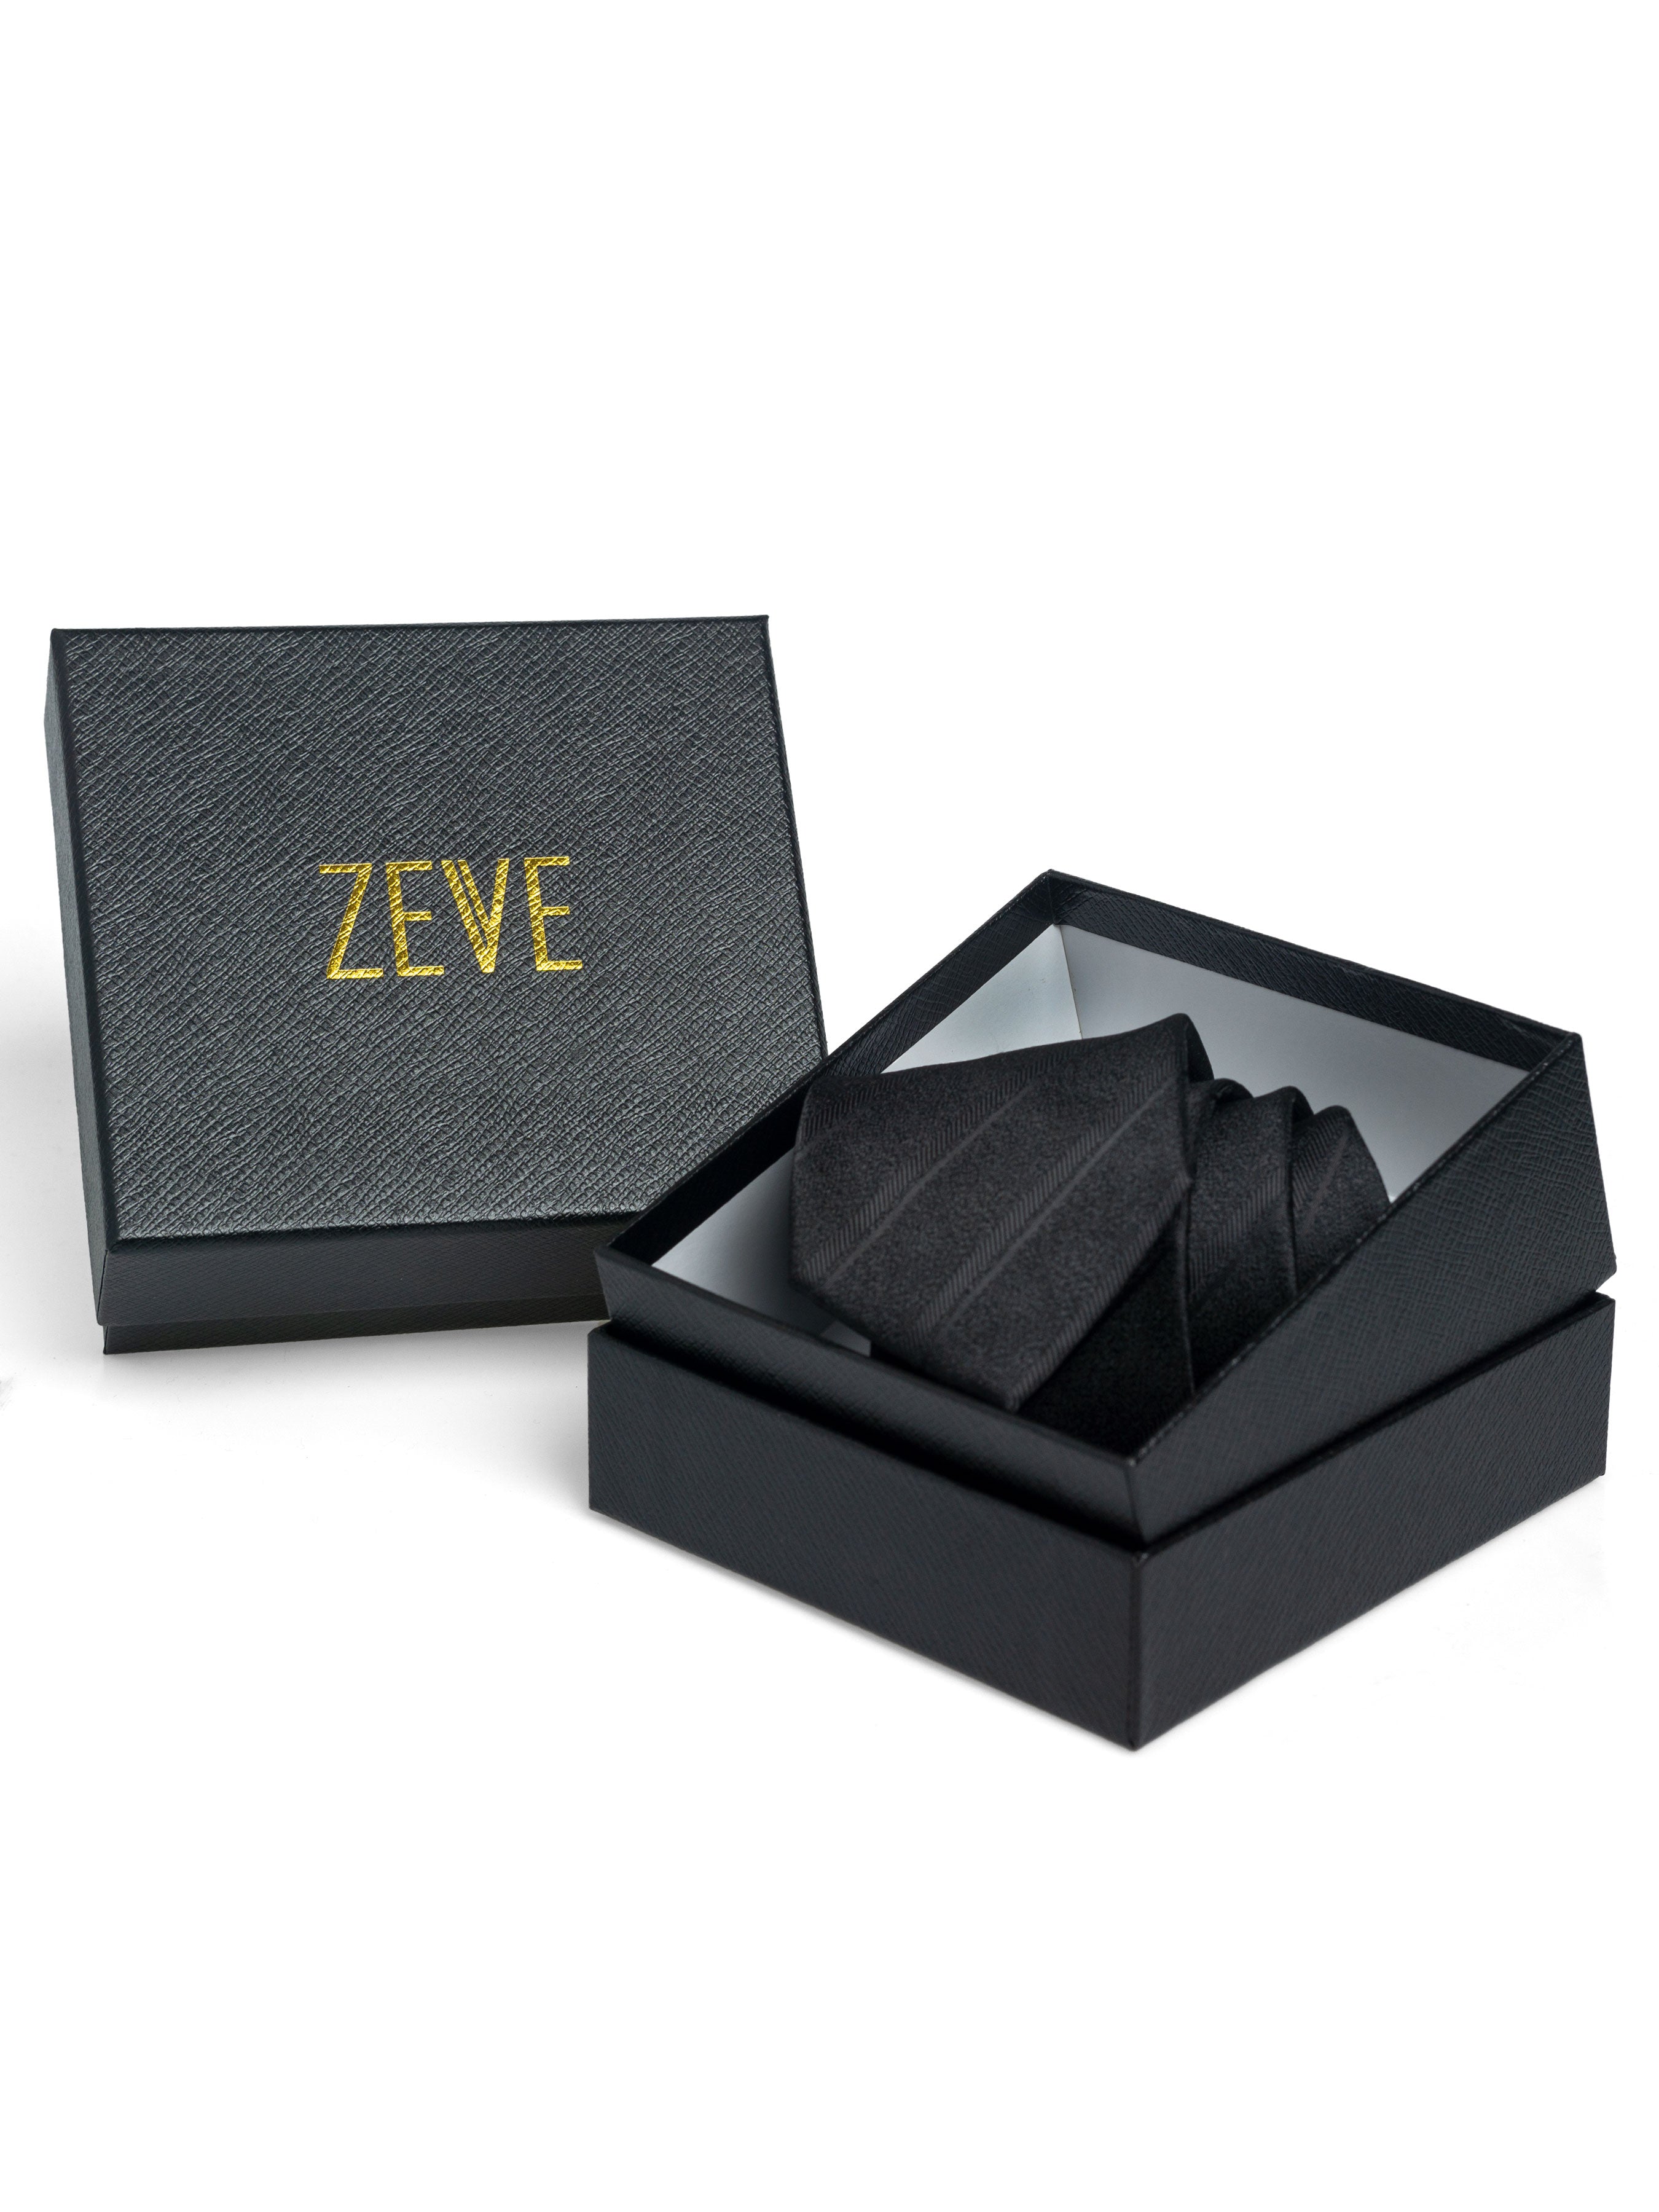 Abstract Tie - Red with Mini Black Lines - Zeve Shoes